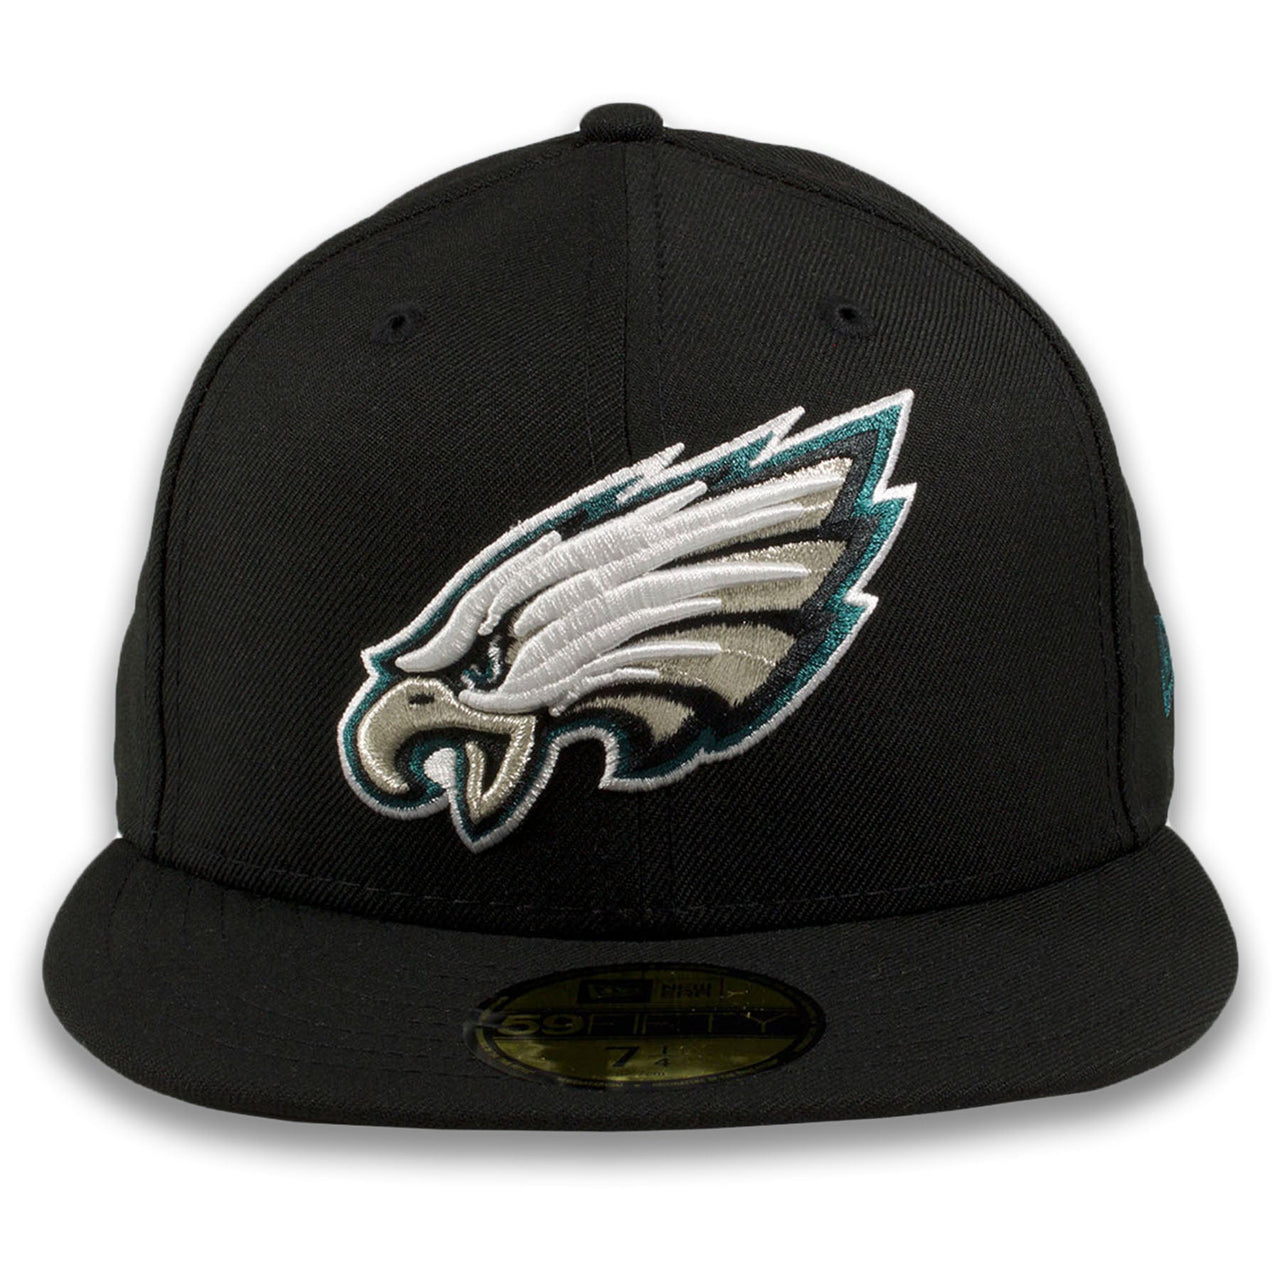 Eagles Black fitted with white current logo fitted on field 5950 hats Current day Wentz style fitted hat includes eagles font lettering on back